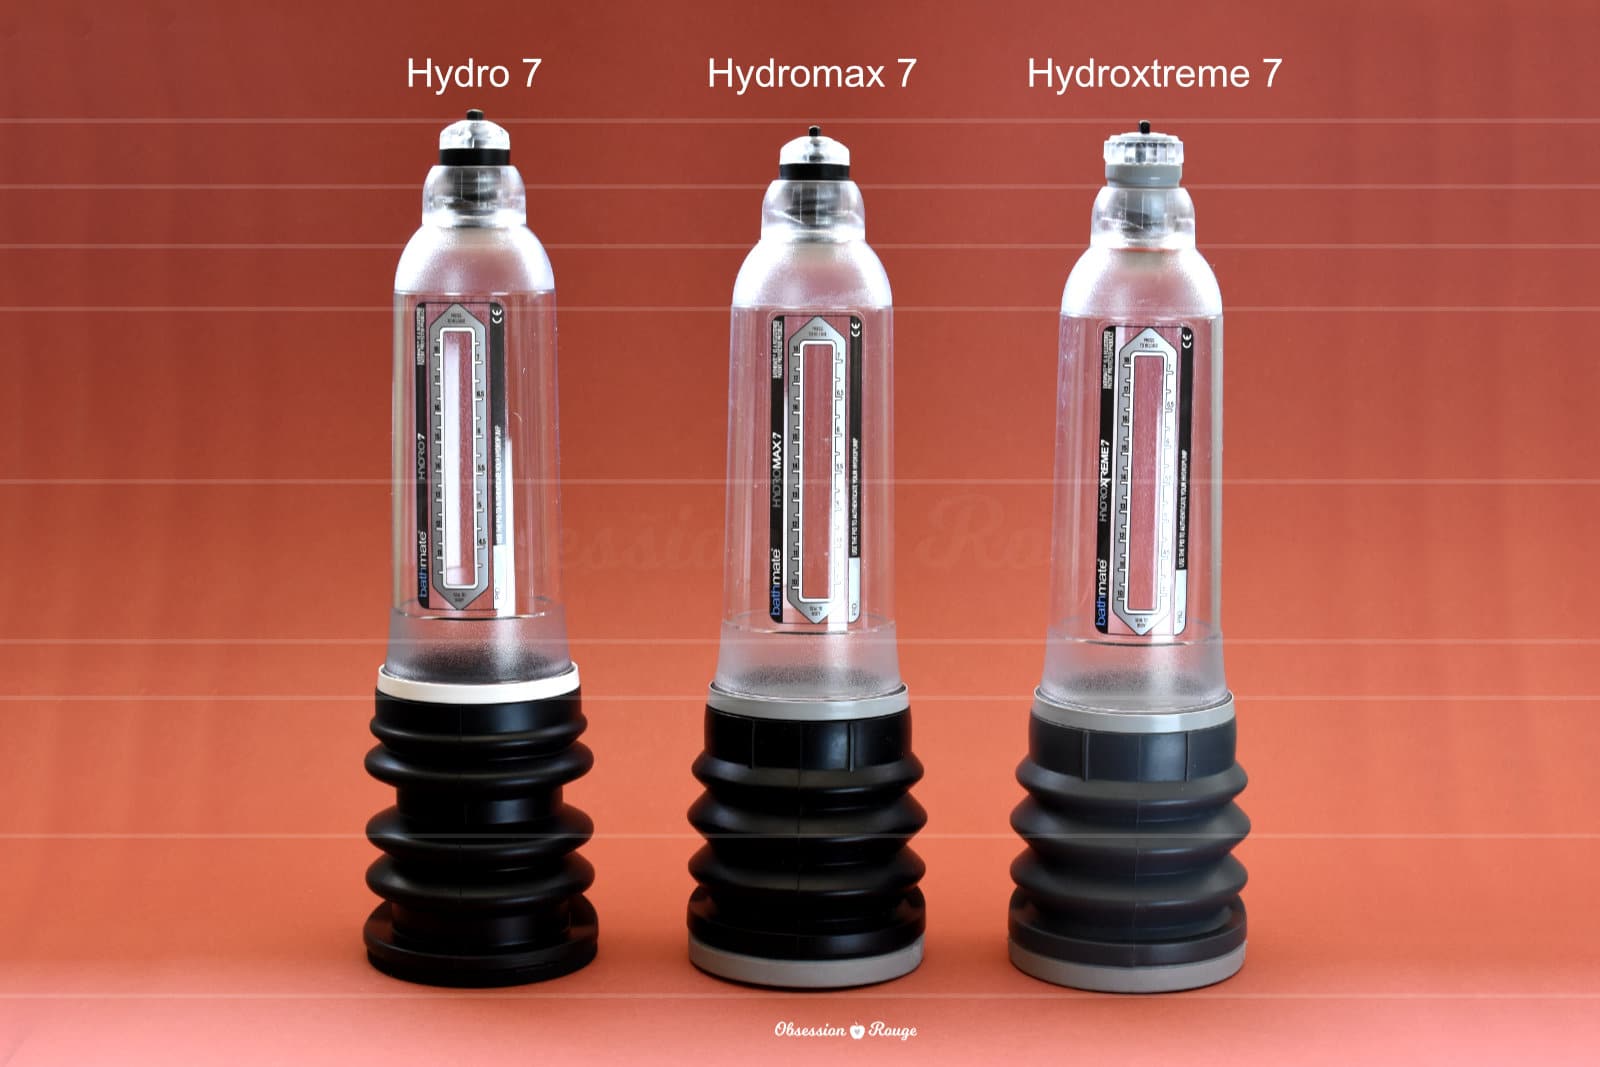 Does the hydromax7 really work